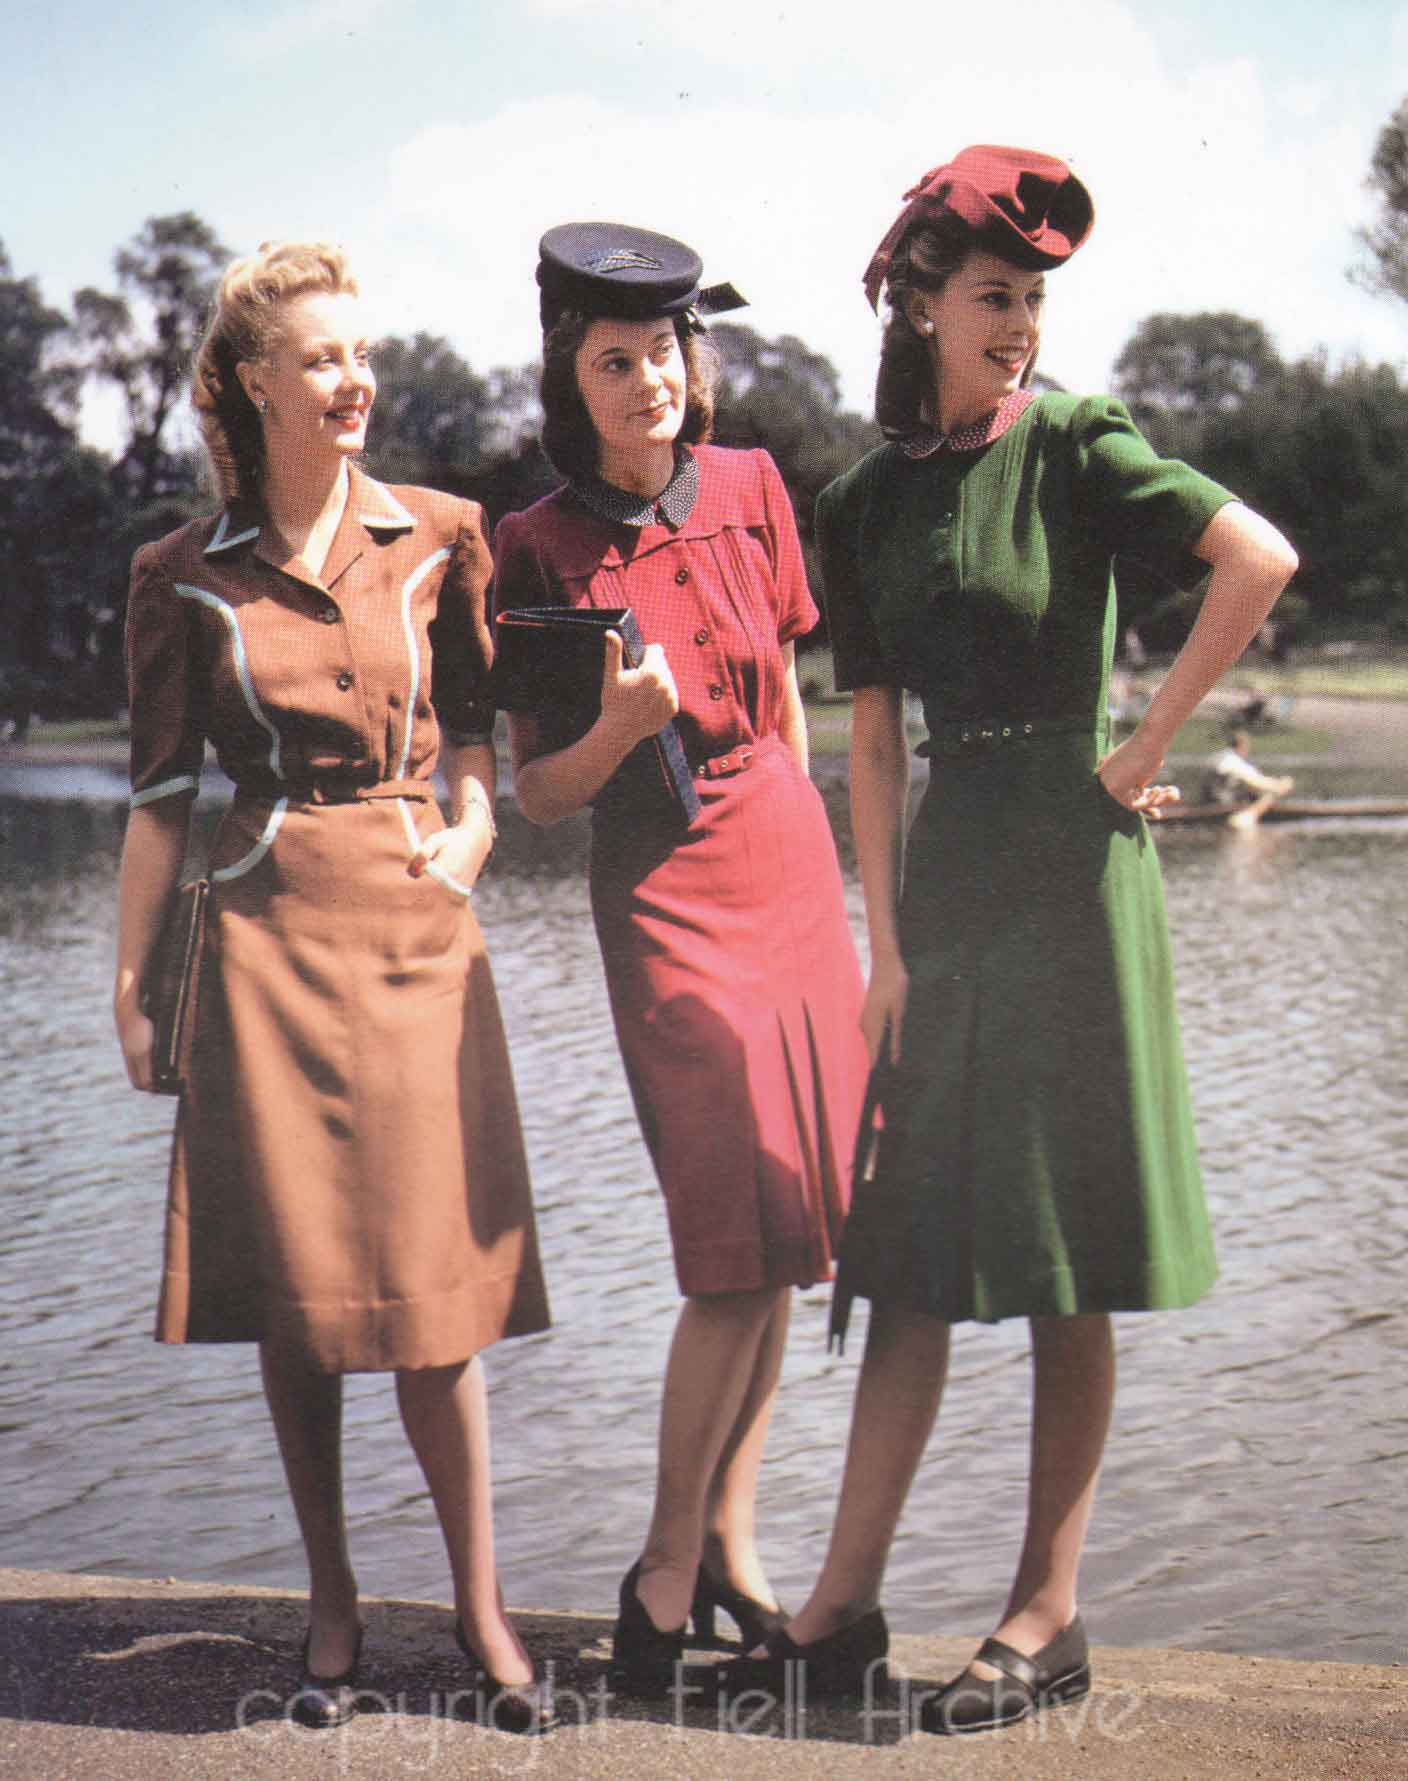  published a 1940’s fashion book, which we’ll be reviewing soon